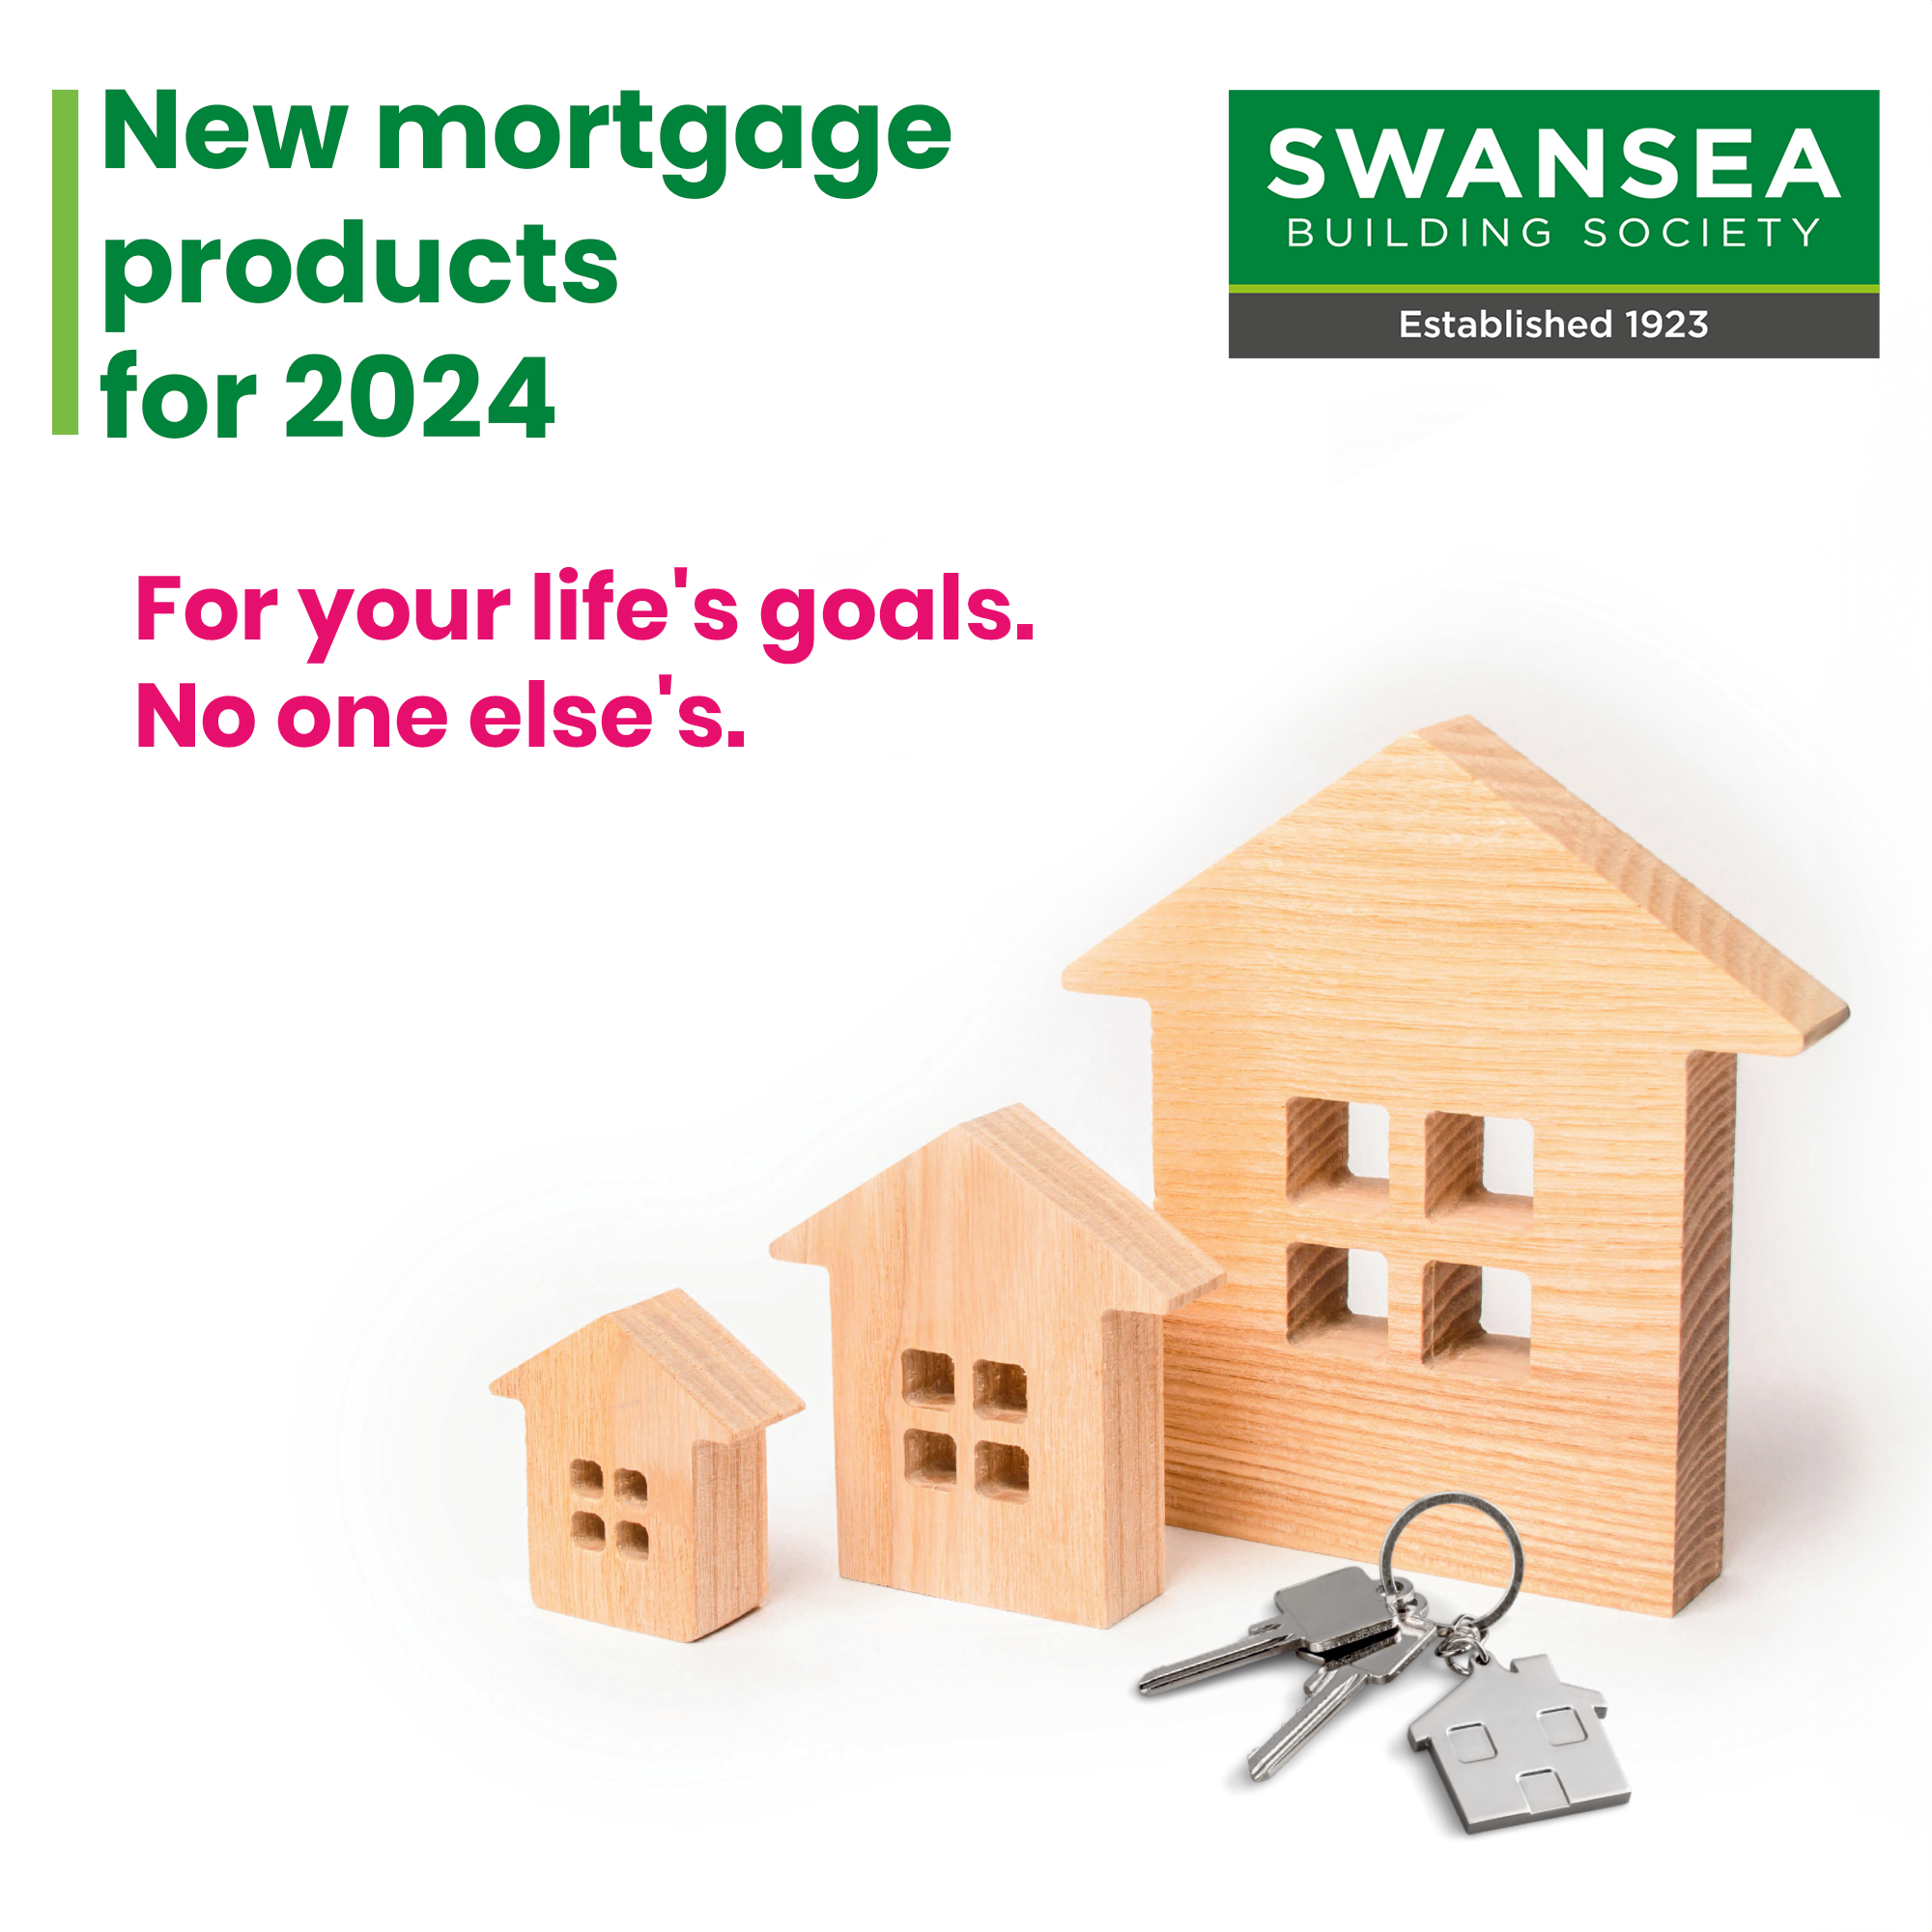 Unveiling our new mortgage products for 2024